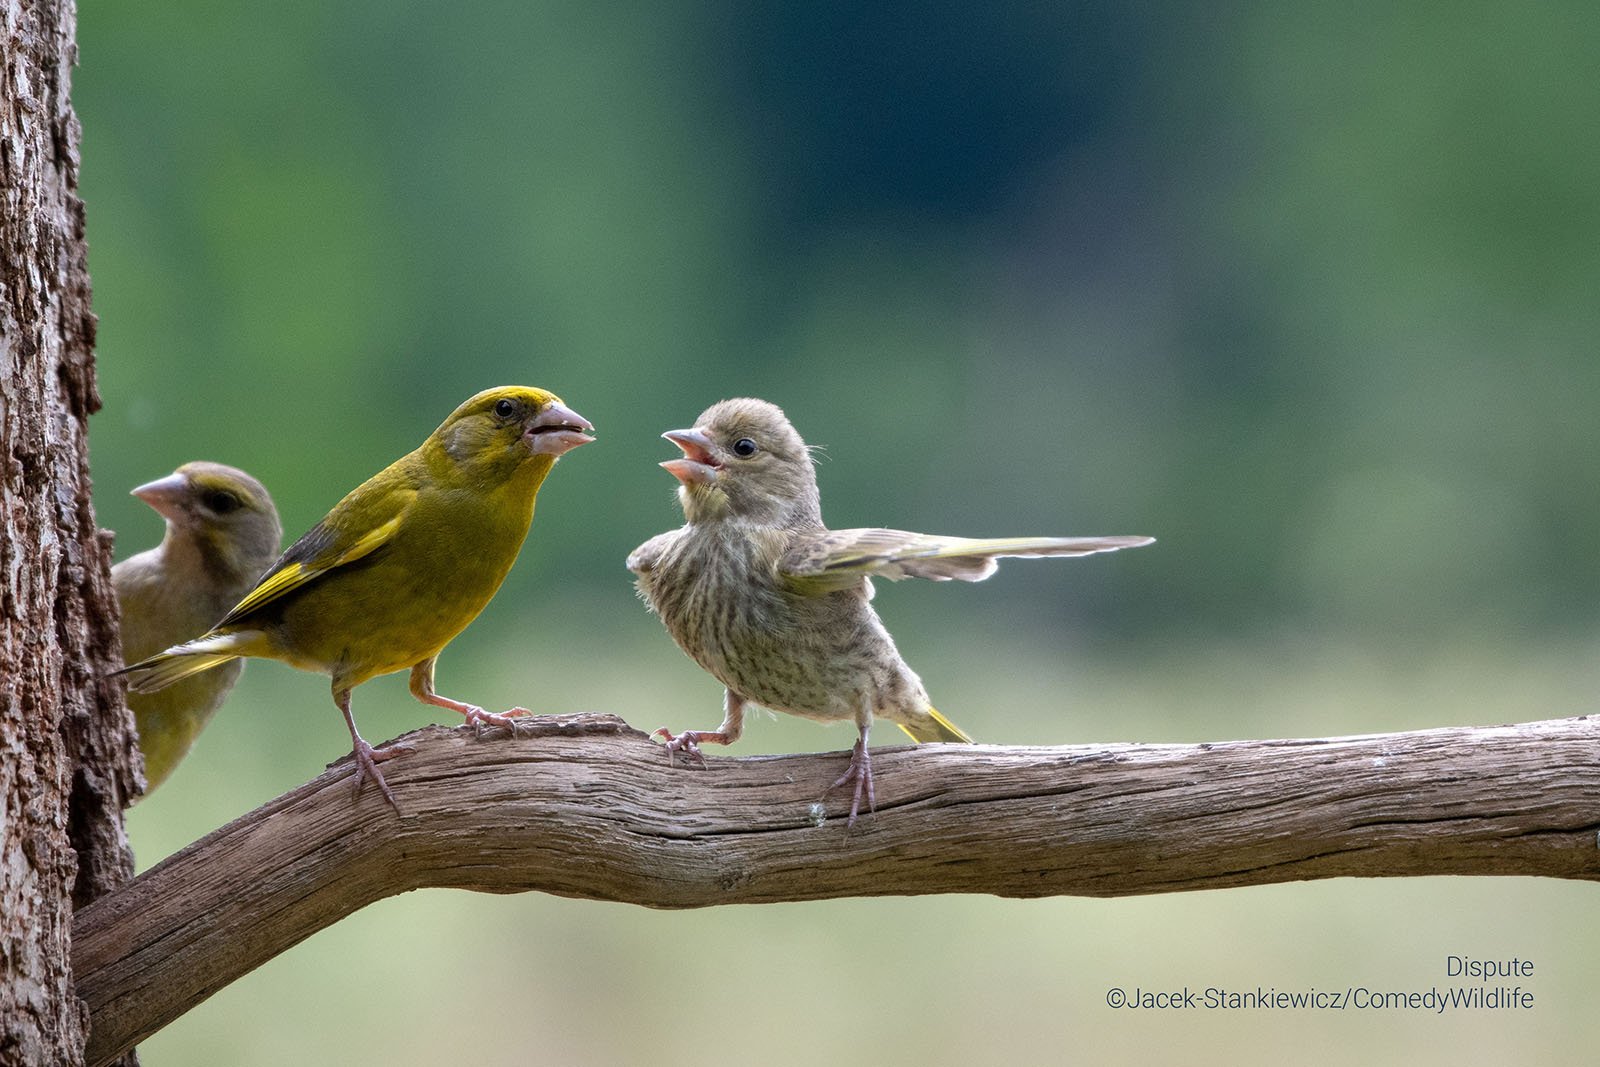 A family of greenfinches, with one looking as if it's angrilly pointing.